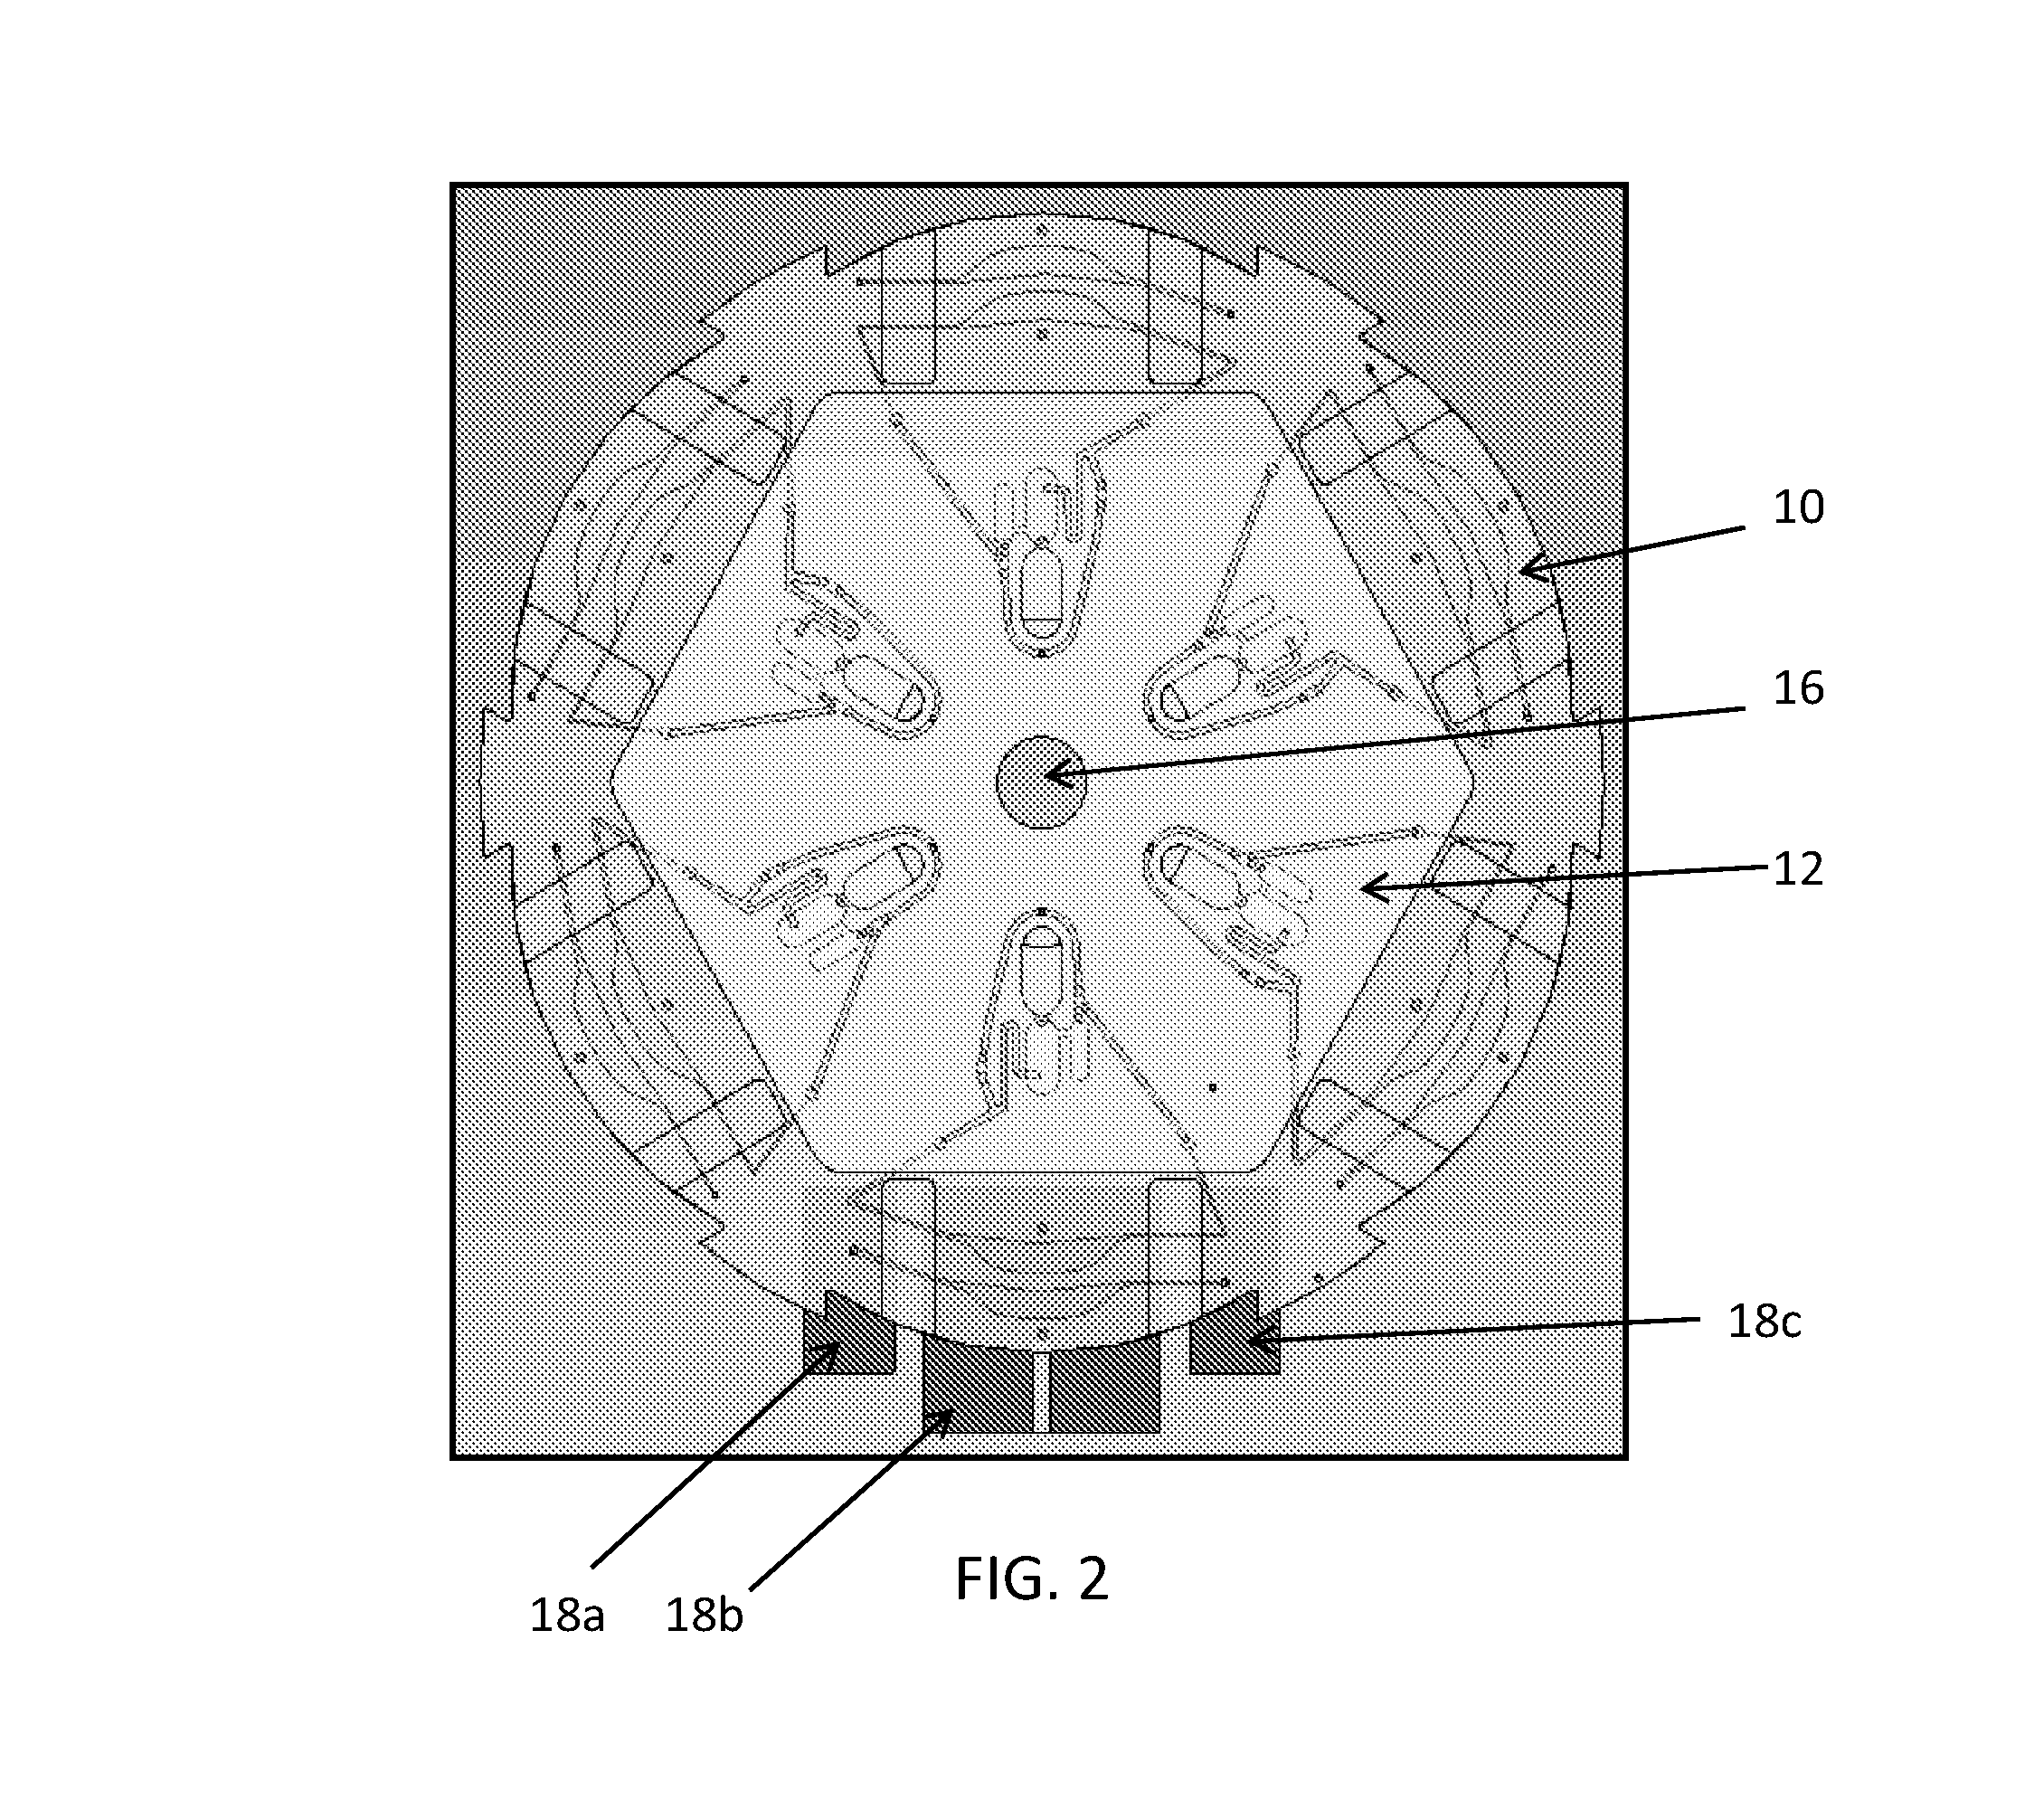 Centrifugal microfluidic system for nucleic acid sample preparation, amplification, and detection